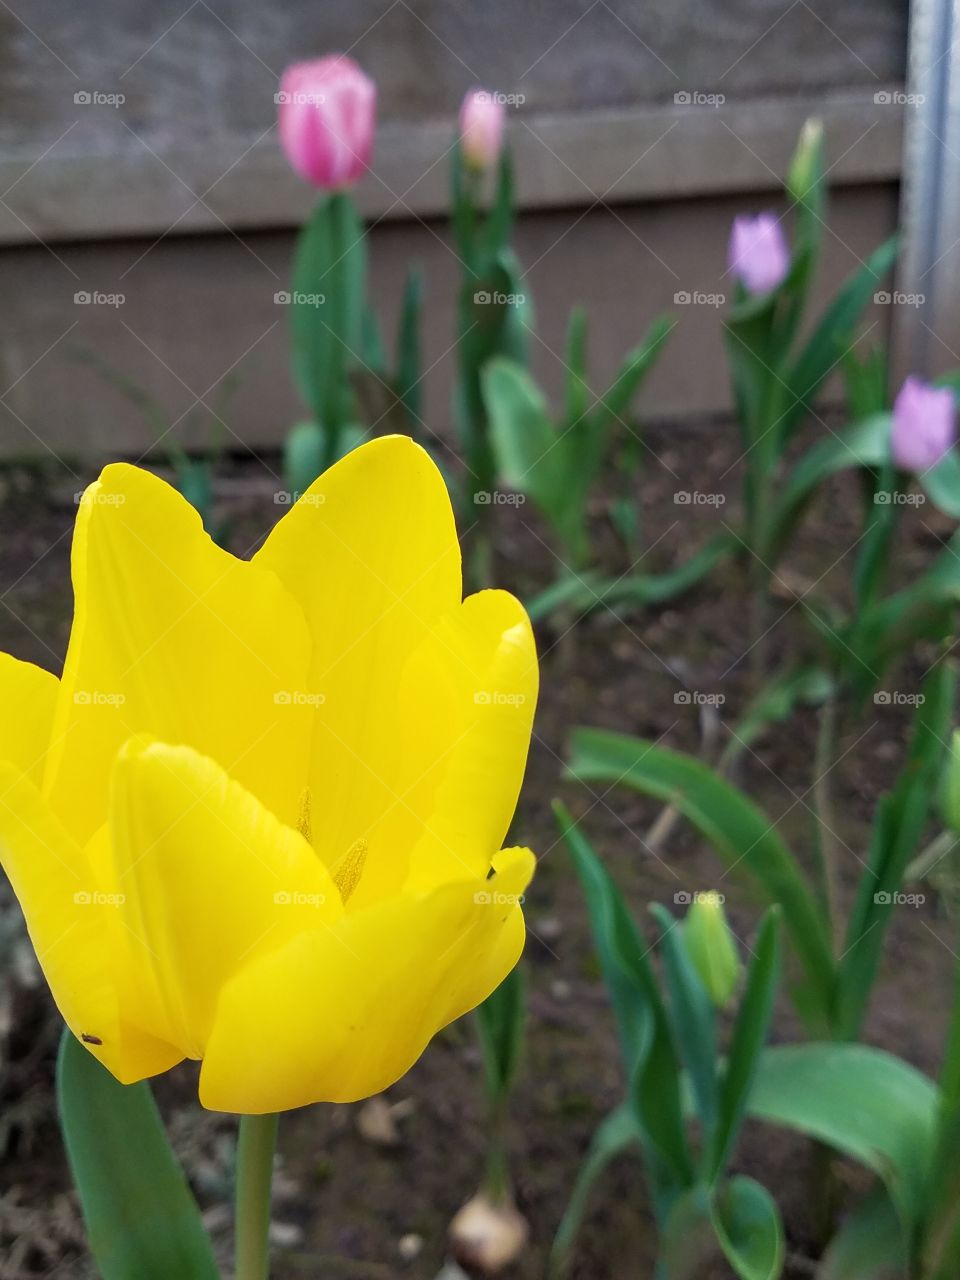 Tulips making an appearance